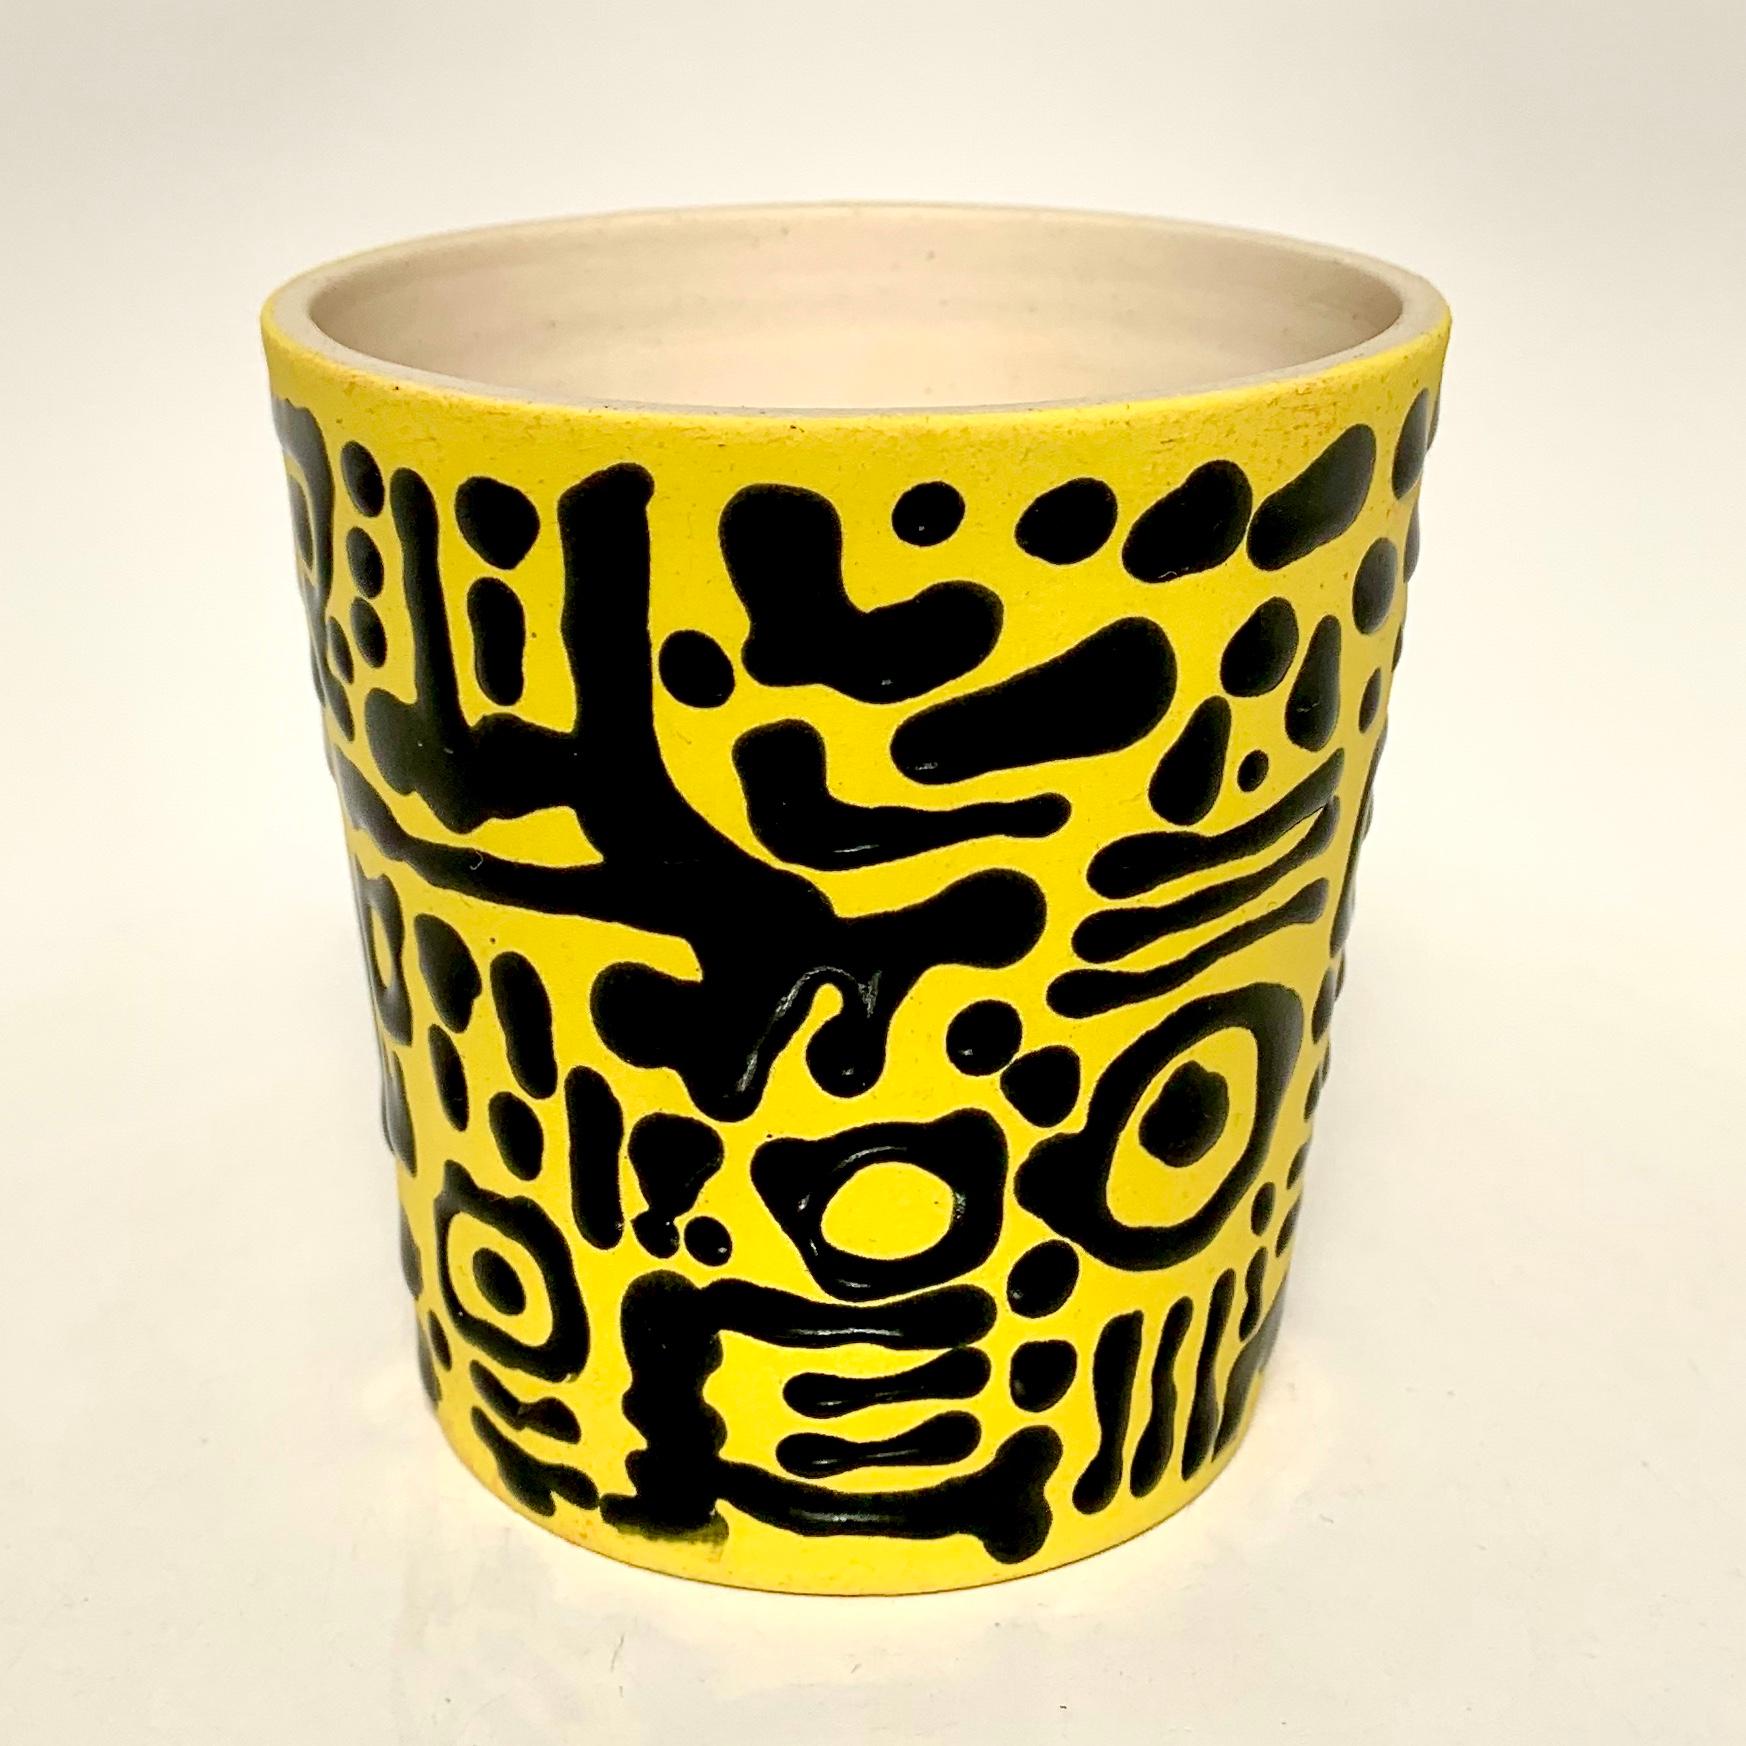 North American Pop Tribal Tumbler with Handle, Handmade and Food Safe, by Artist Stef Duffy For Sale